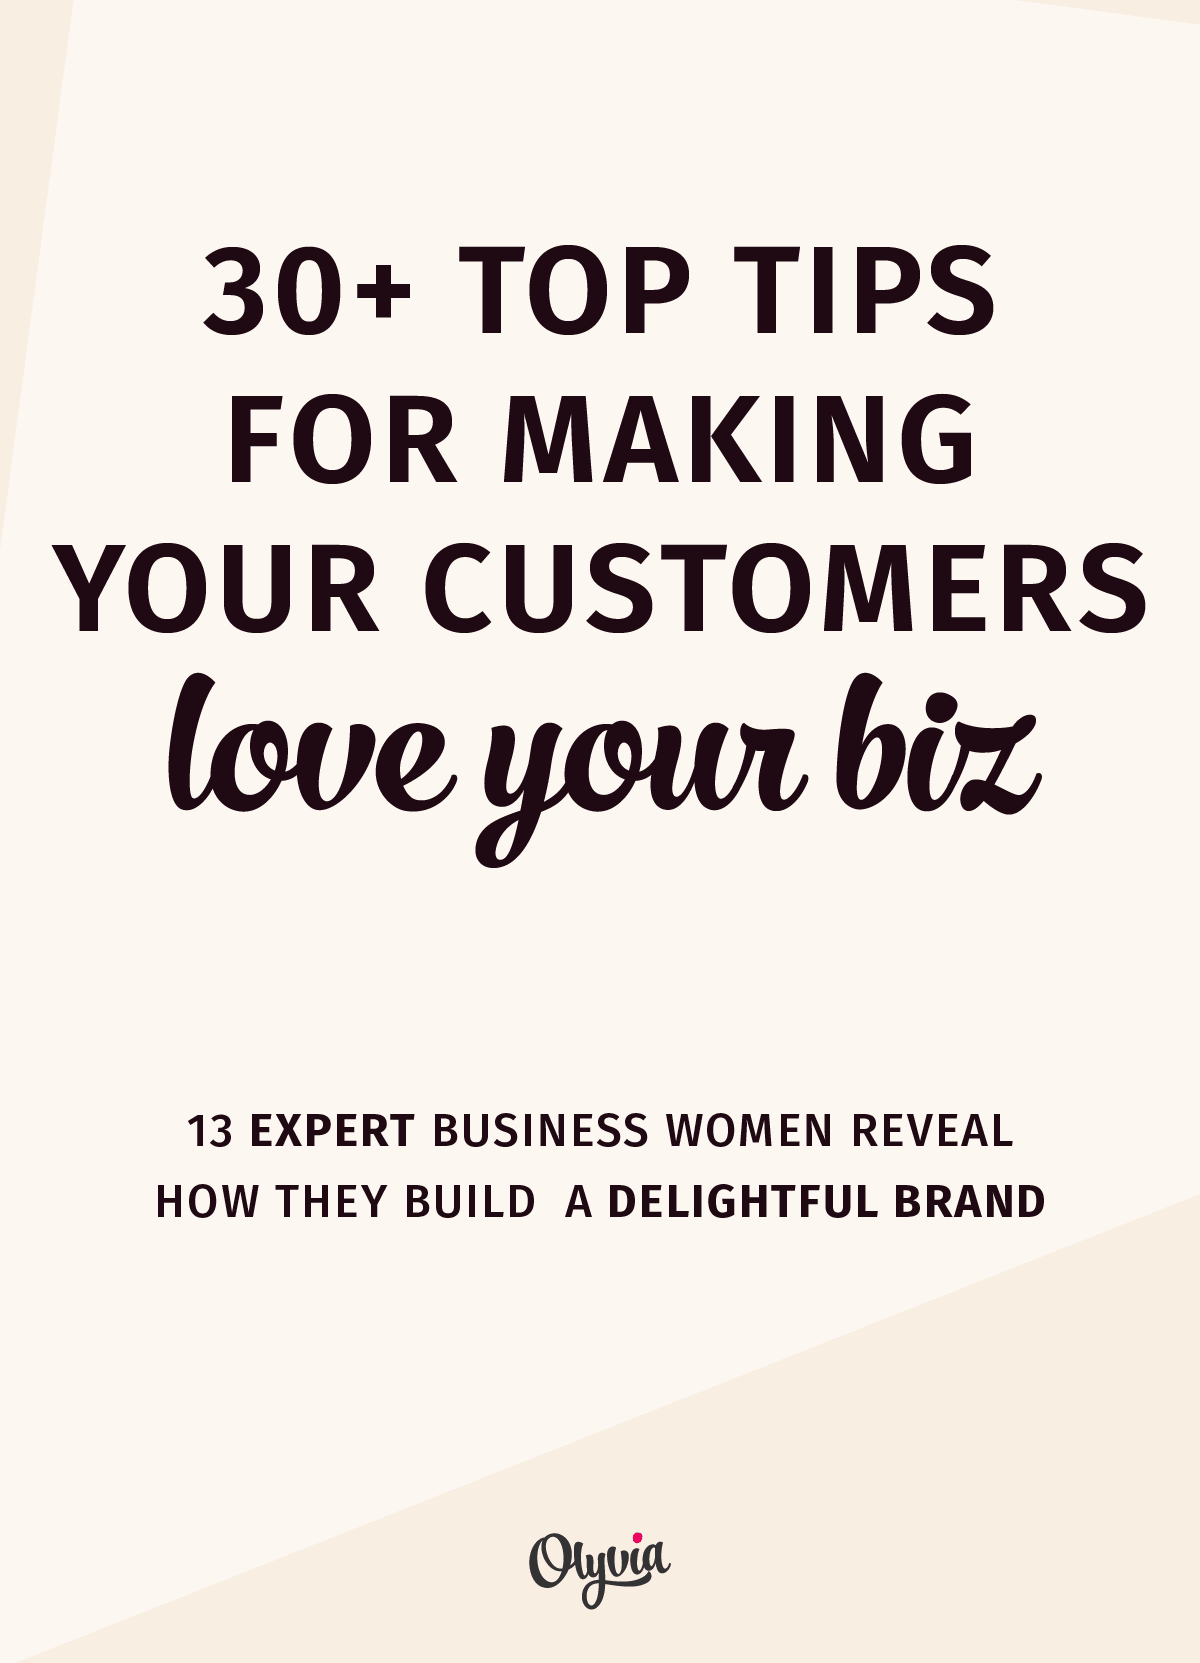 Great small business tips from successful women on how you can impress your customers and look like a professional. A must read for the entrepreneurs, freelancers, Etsy shop owners, and other creatives.